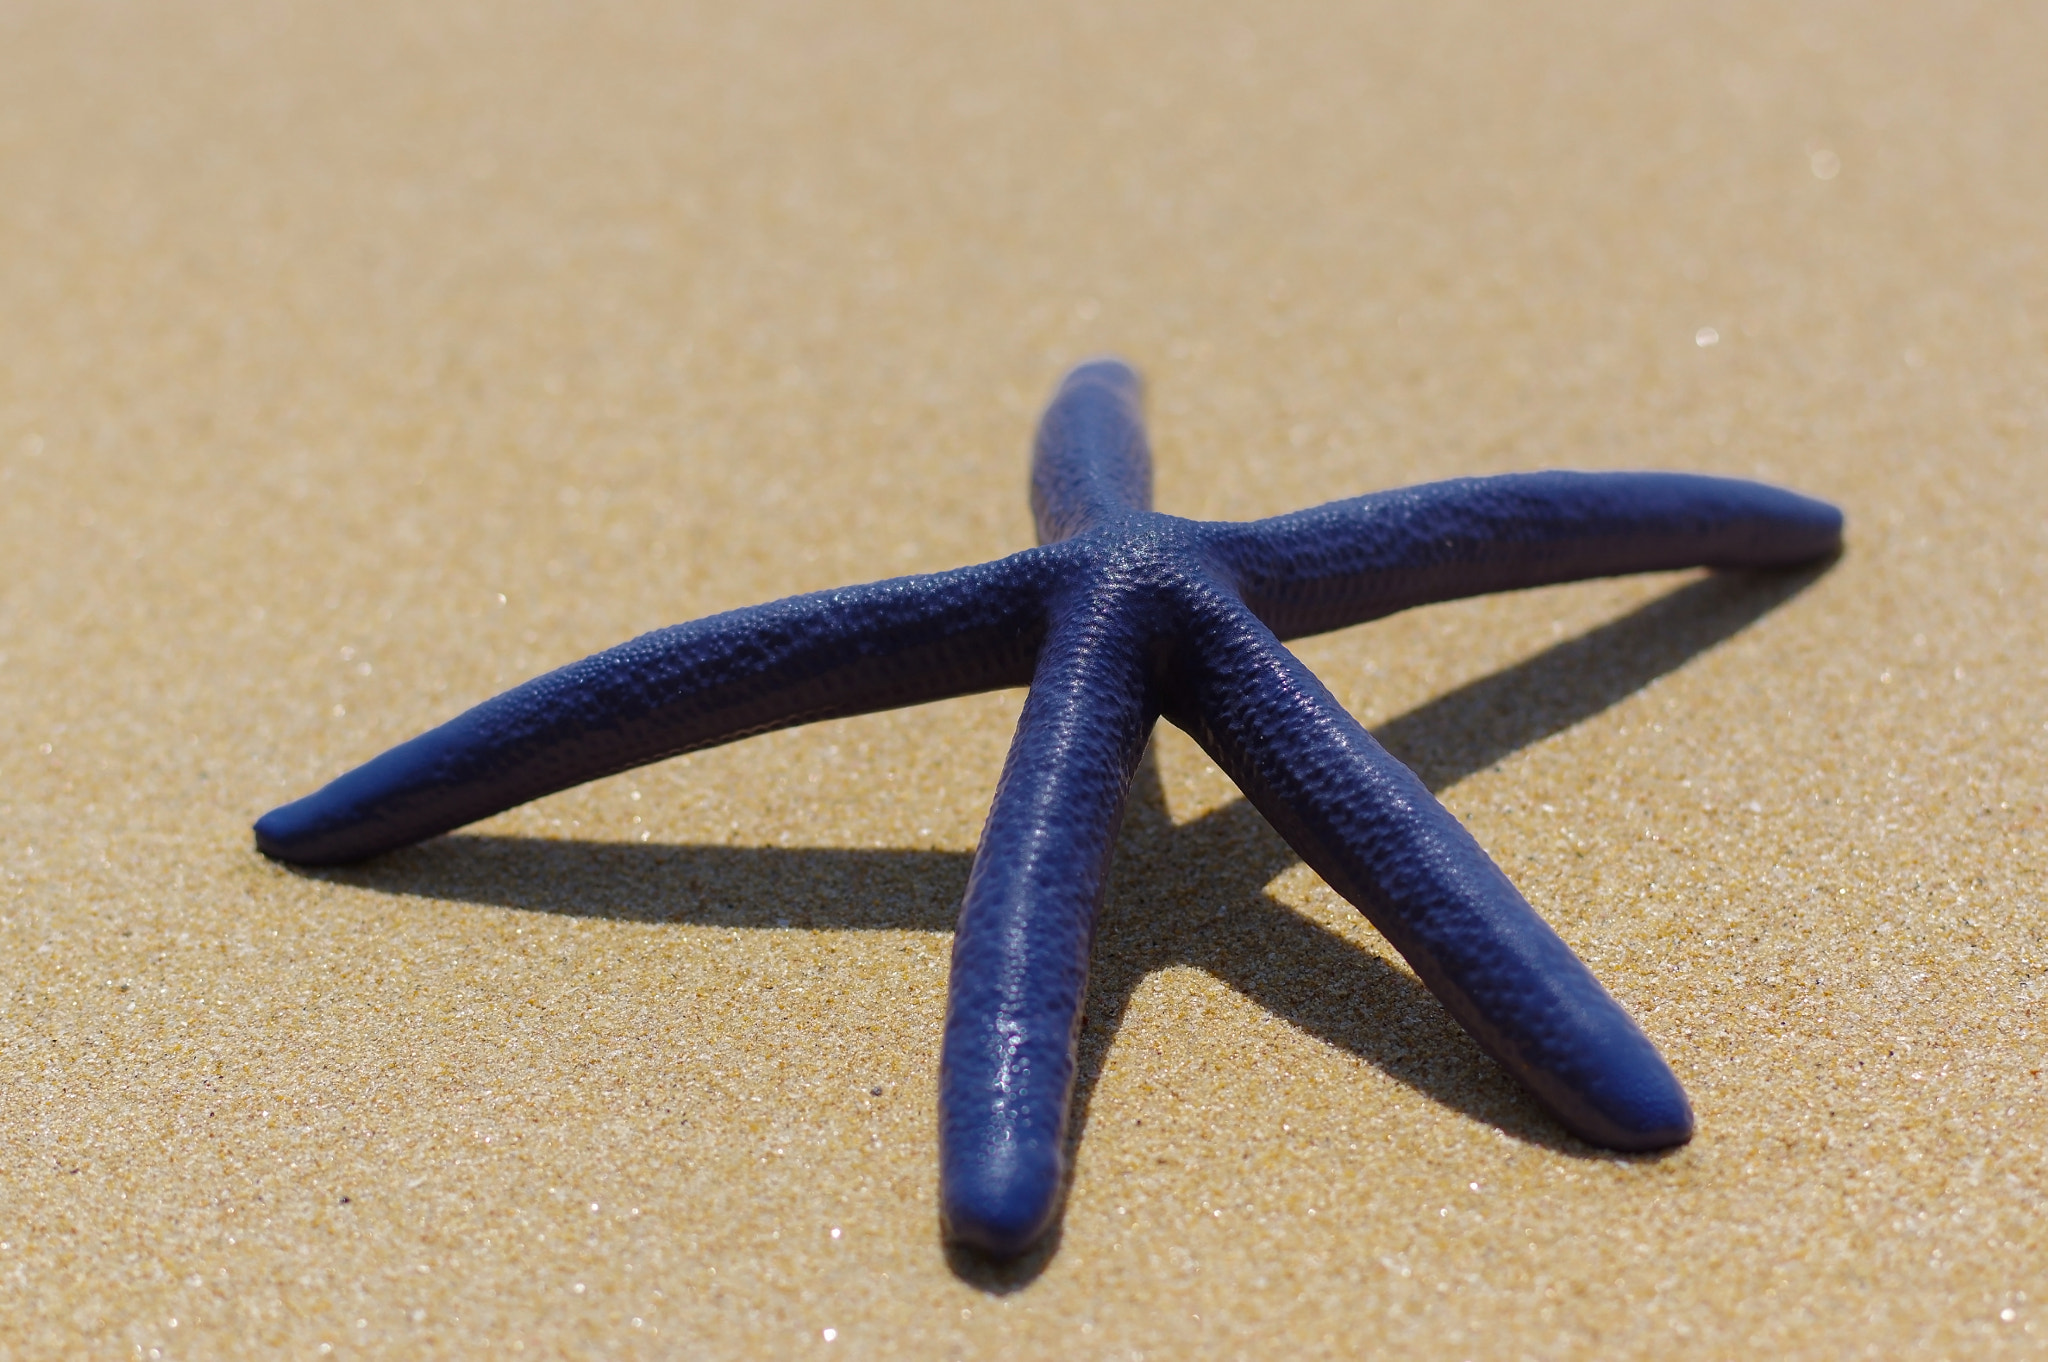 Pentax K-3 sample photo. Blue starfish on the white sand sunny day photography